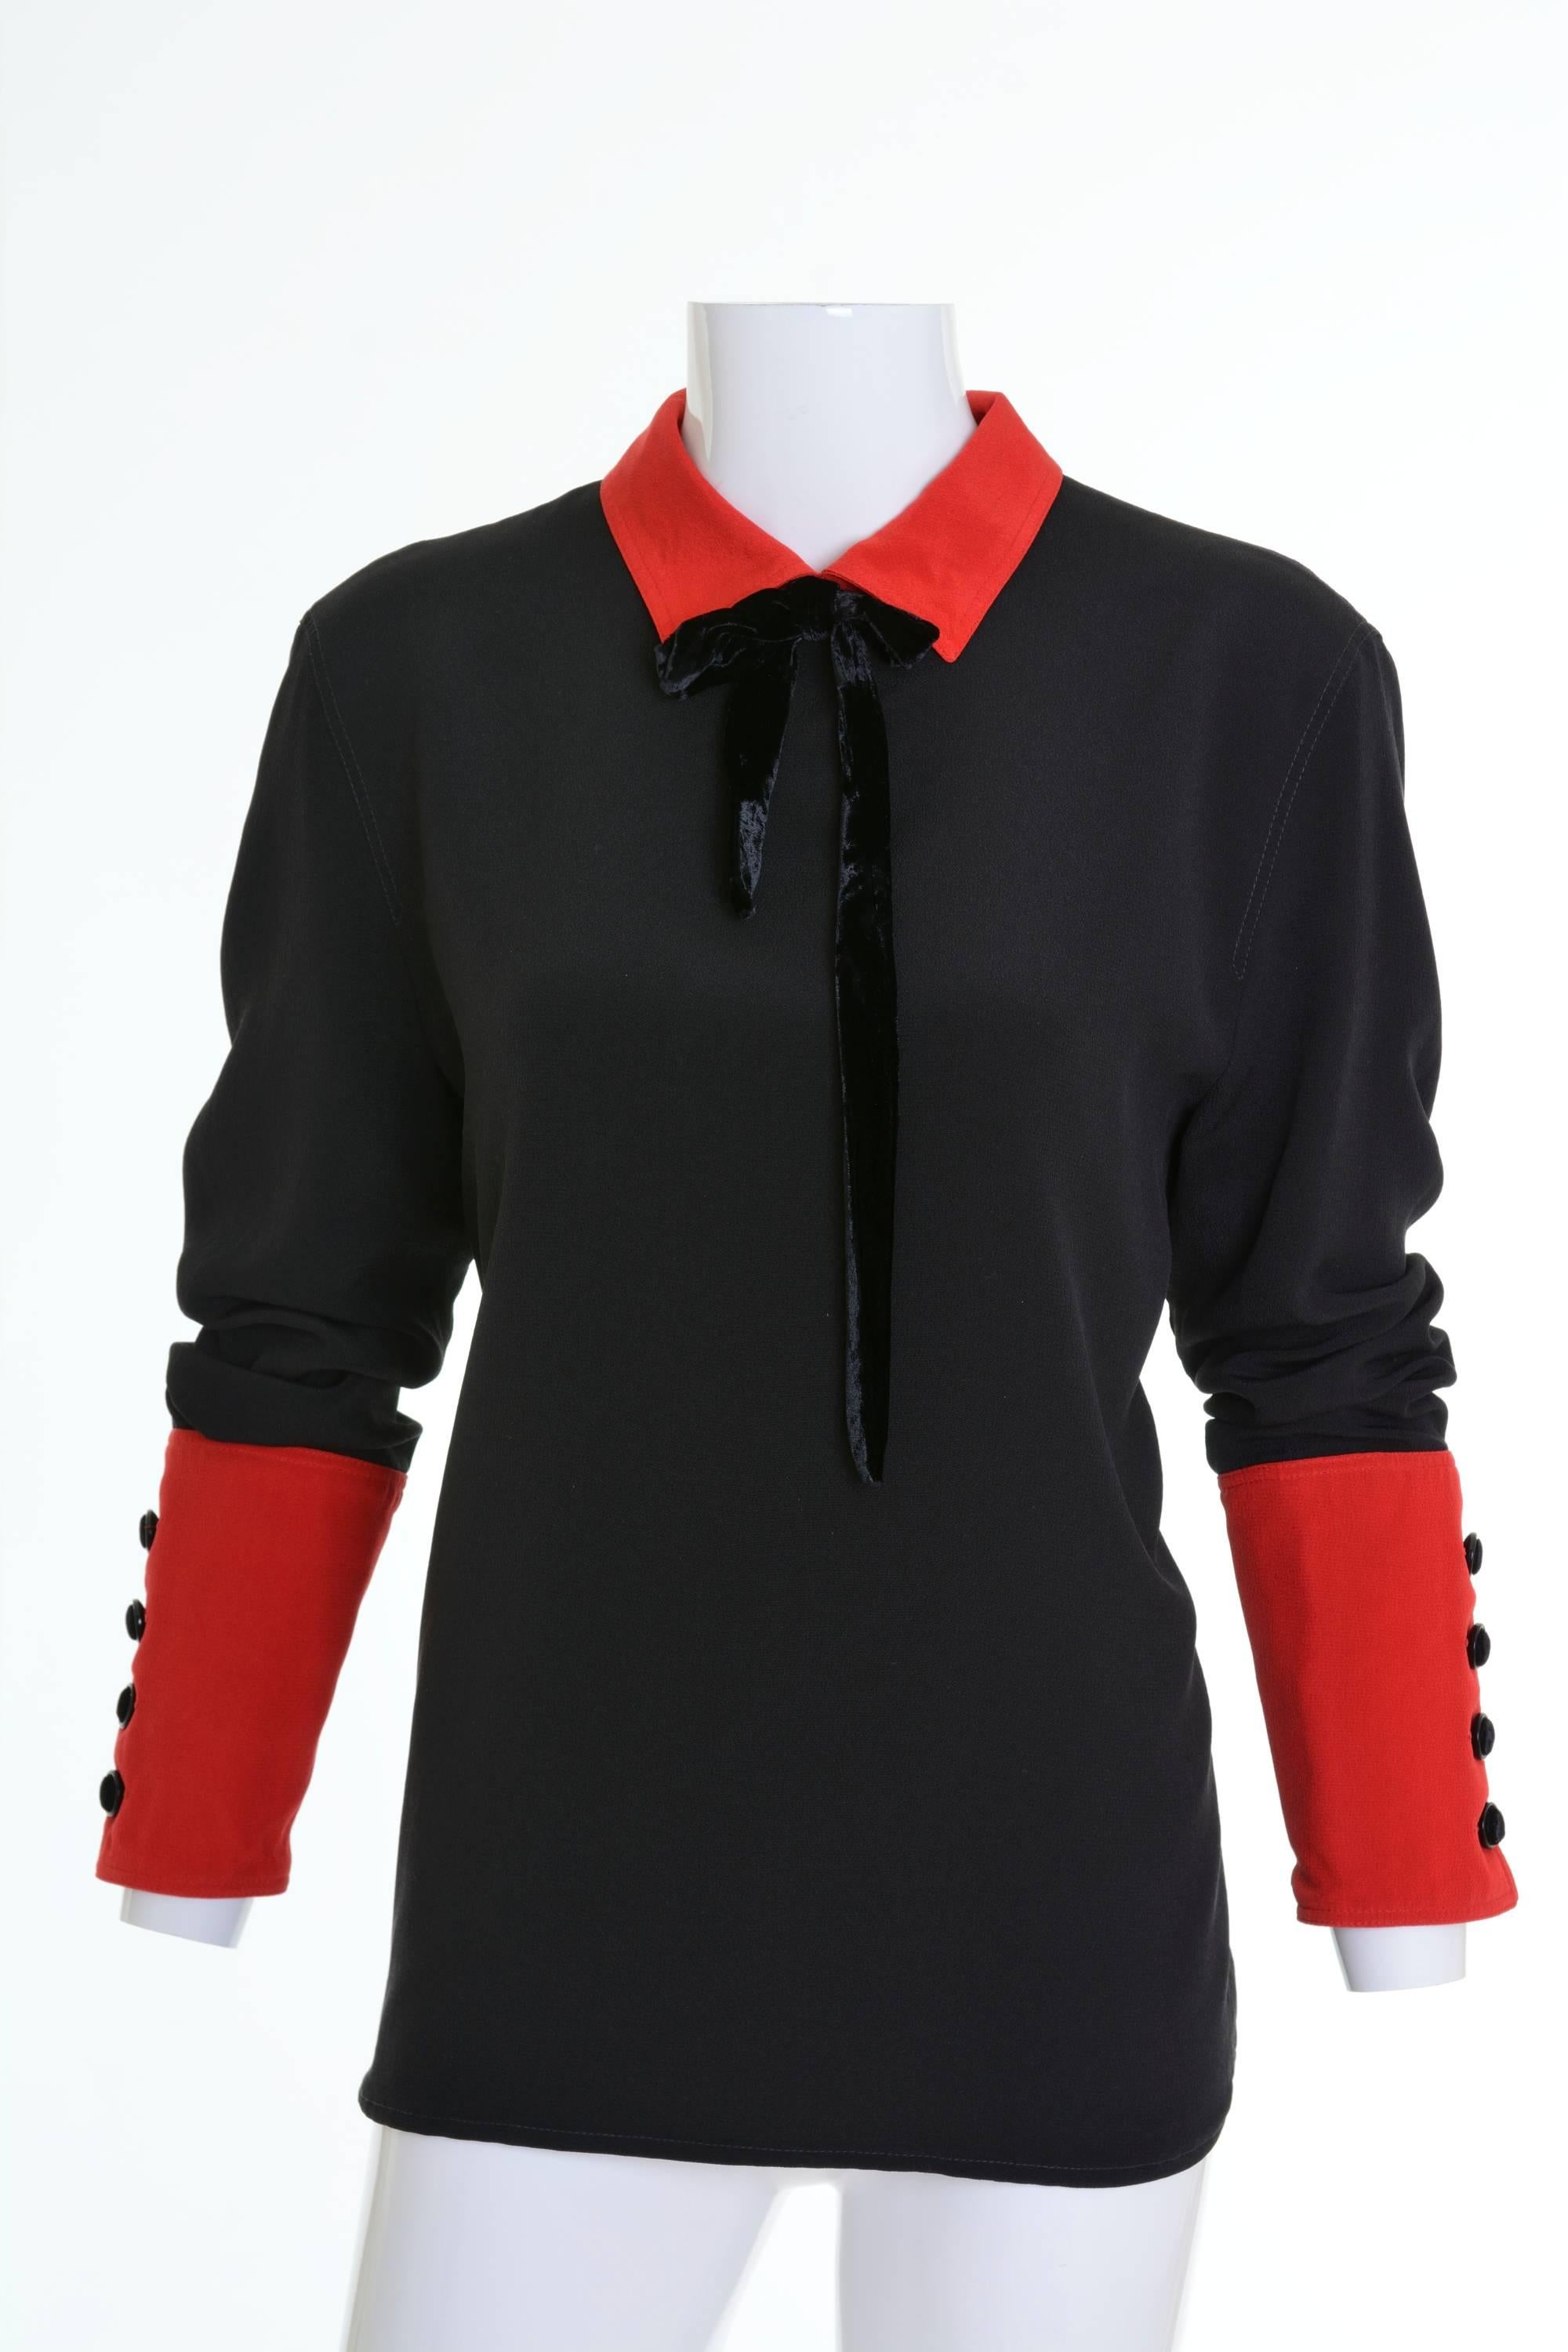 1980s VALENTINO Boutique Black and Red Silk Blouse Shirt In Excellent Condition For Sale In Milan, Italy